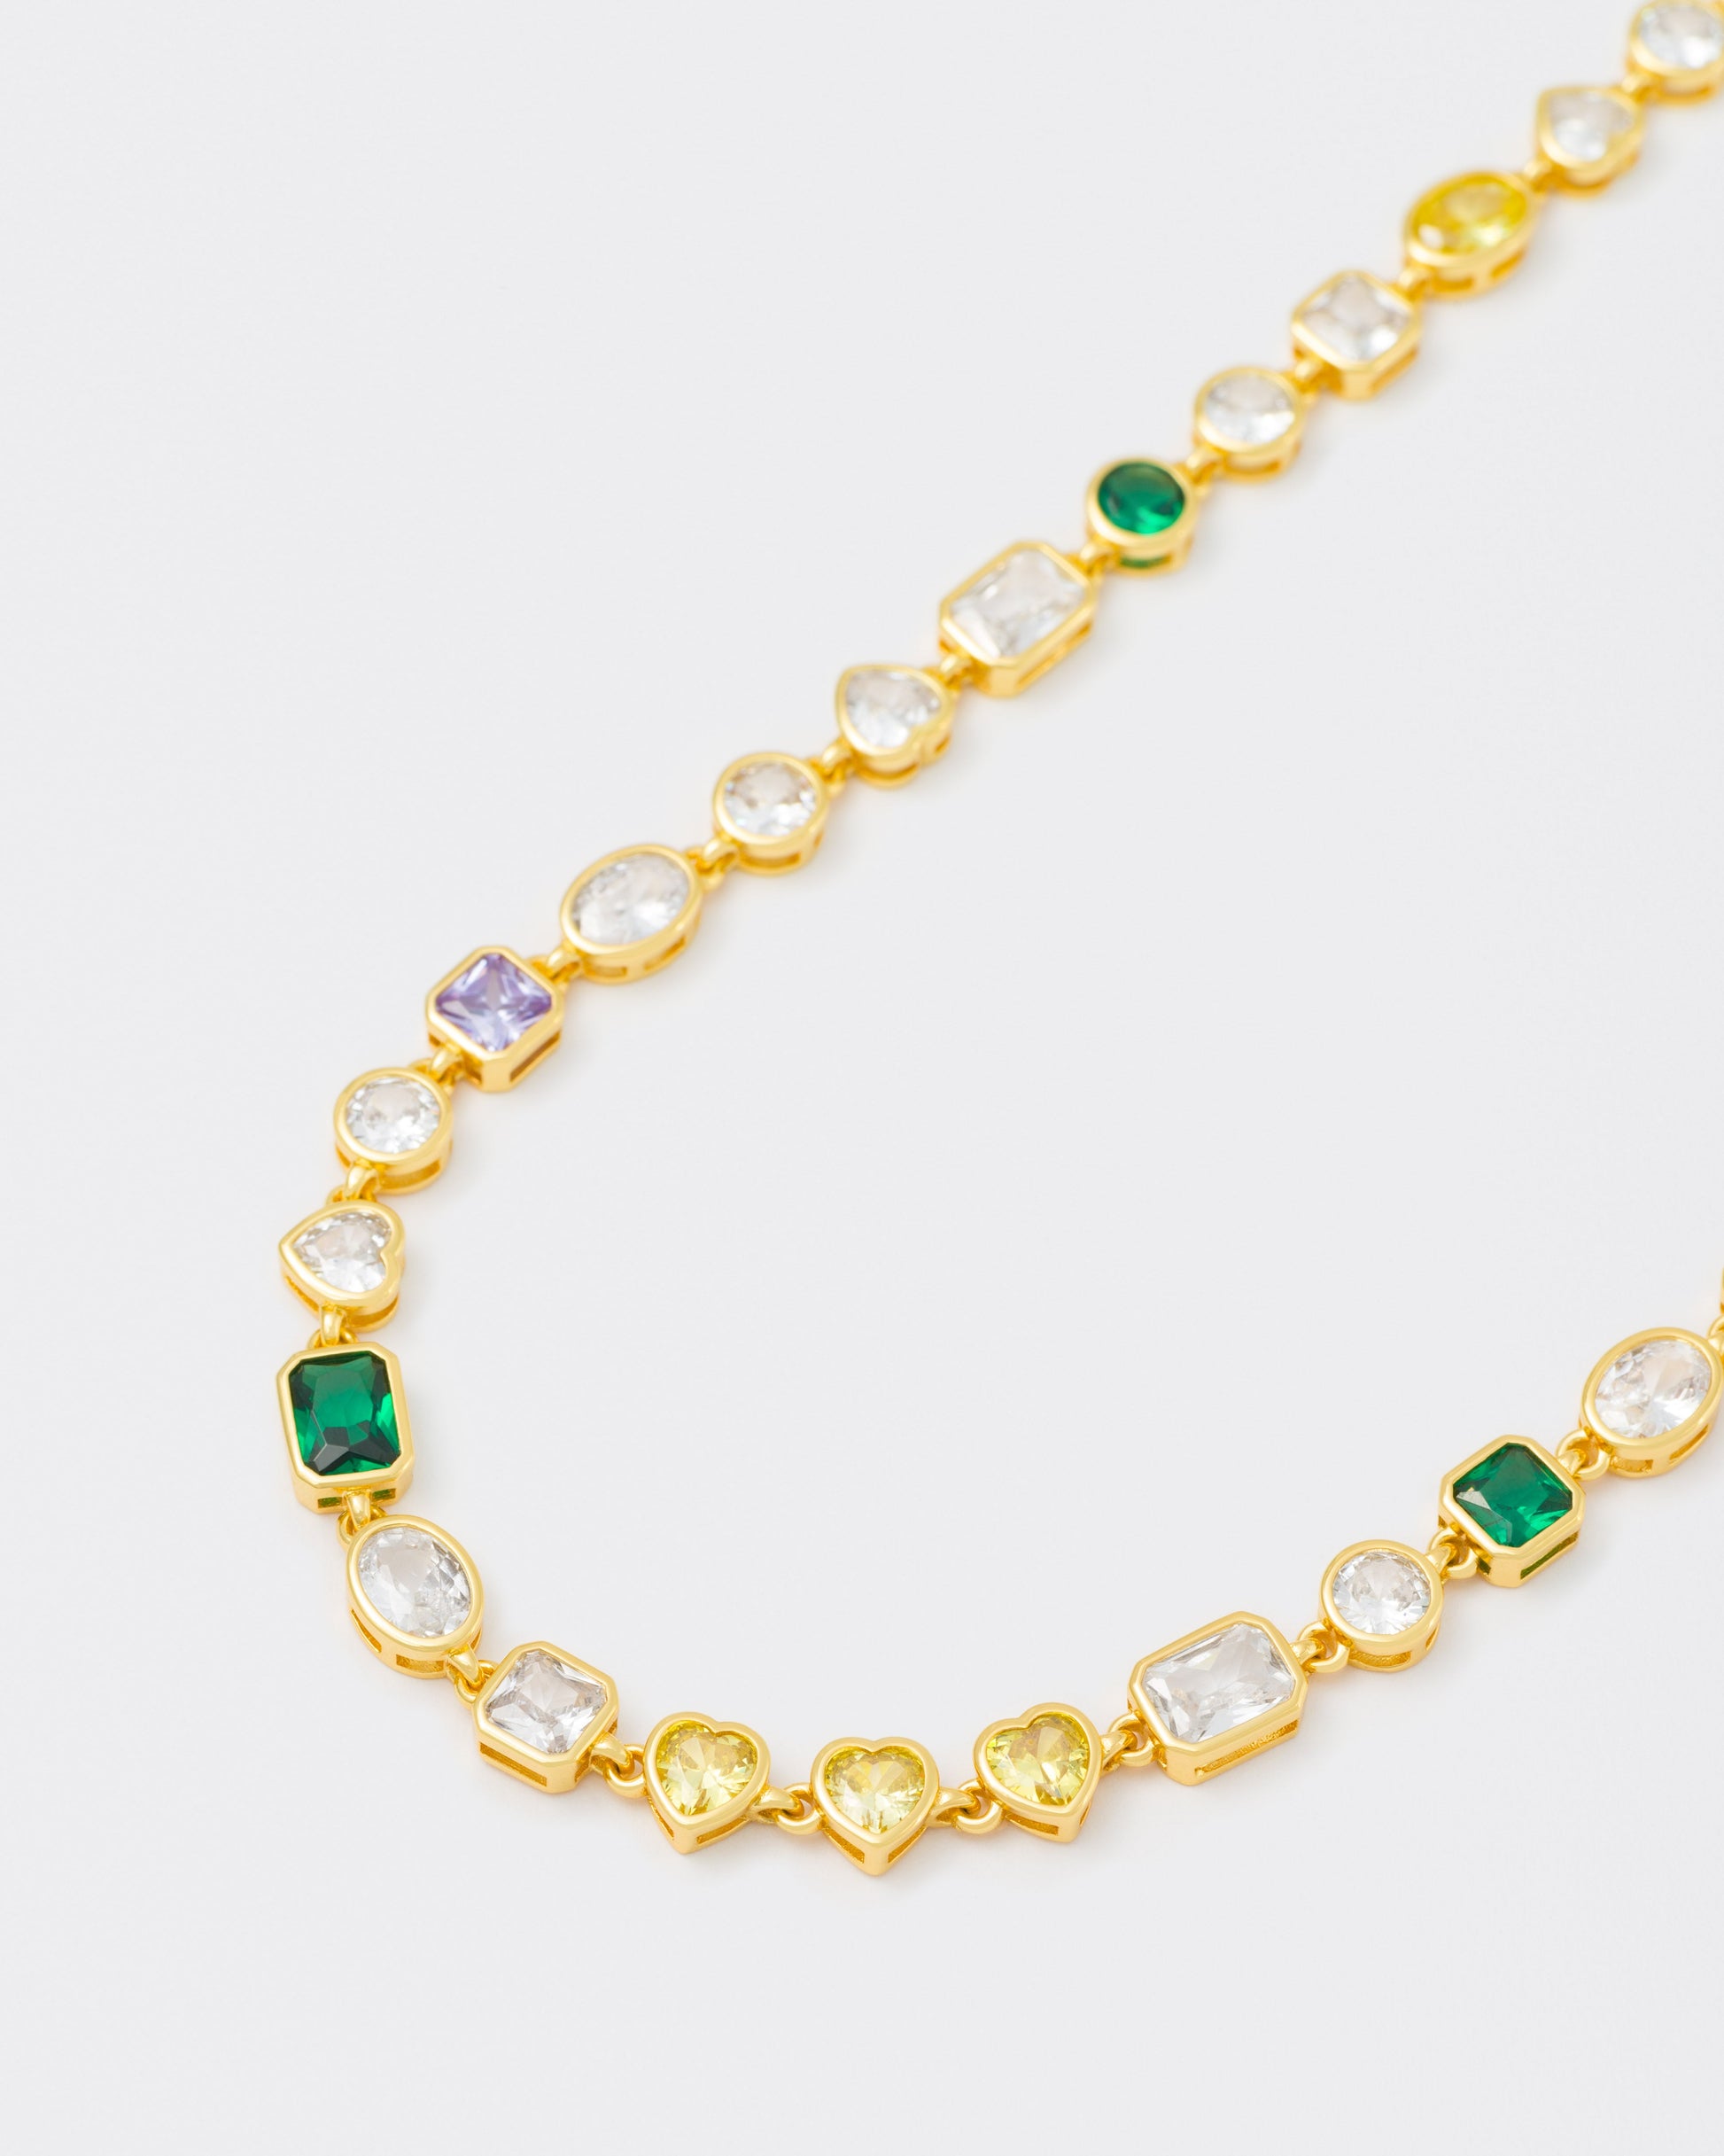 detail of 18k yellow gold coated mixed bezels chain bracelet with hand-set stones in different shapes and colors. Mix of rectangular, square, round and heart-shaped stones in white, amethyst, emerald green and golden yellow